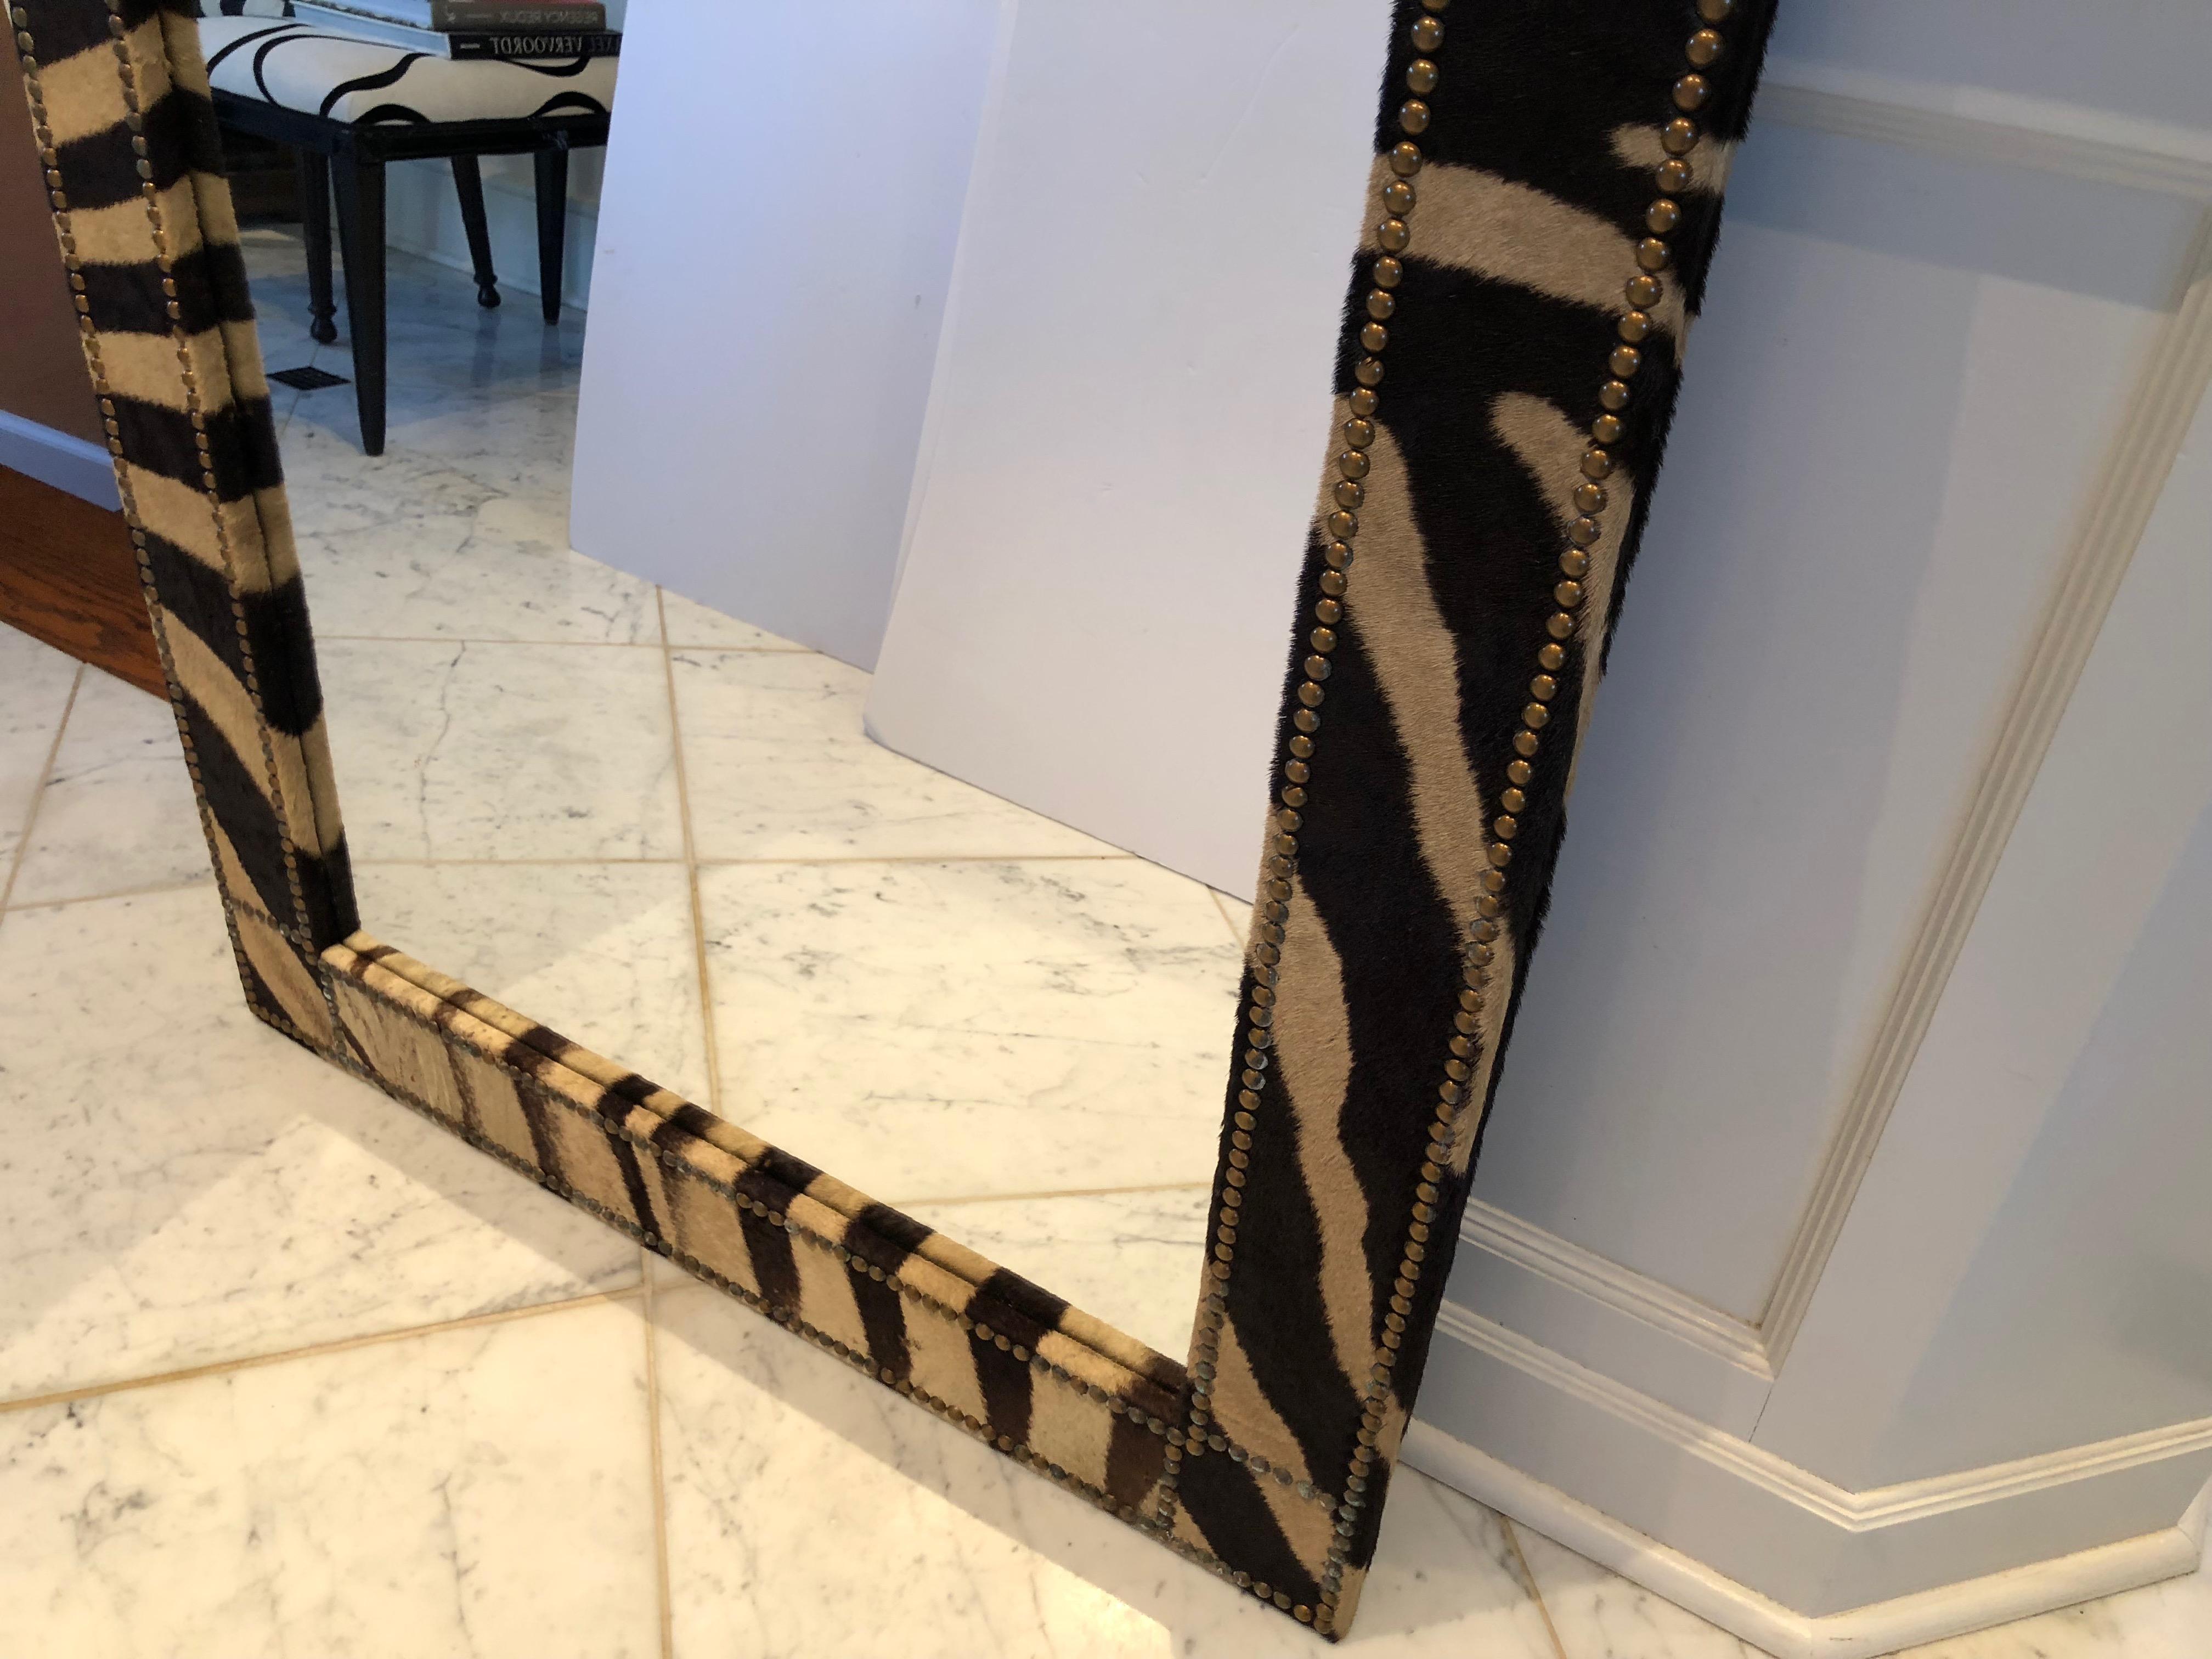 Super chic custom made mirror upholstered in zebra hide and finished with French antique brass nailheads. A pair is available.